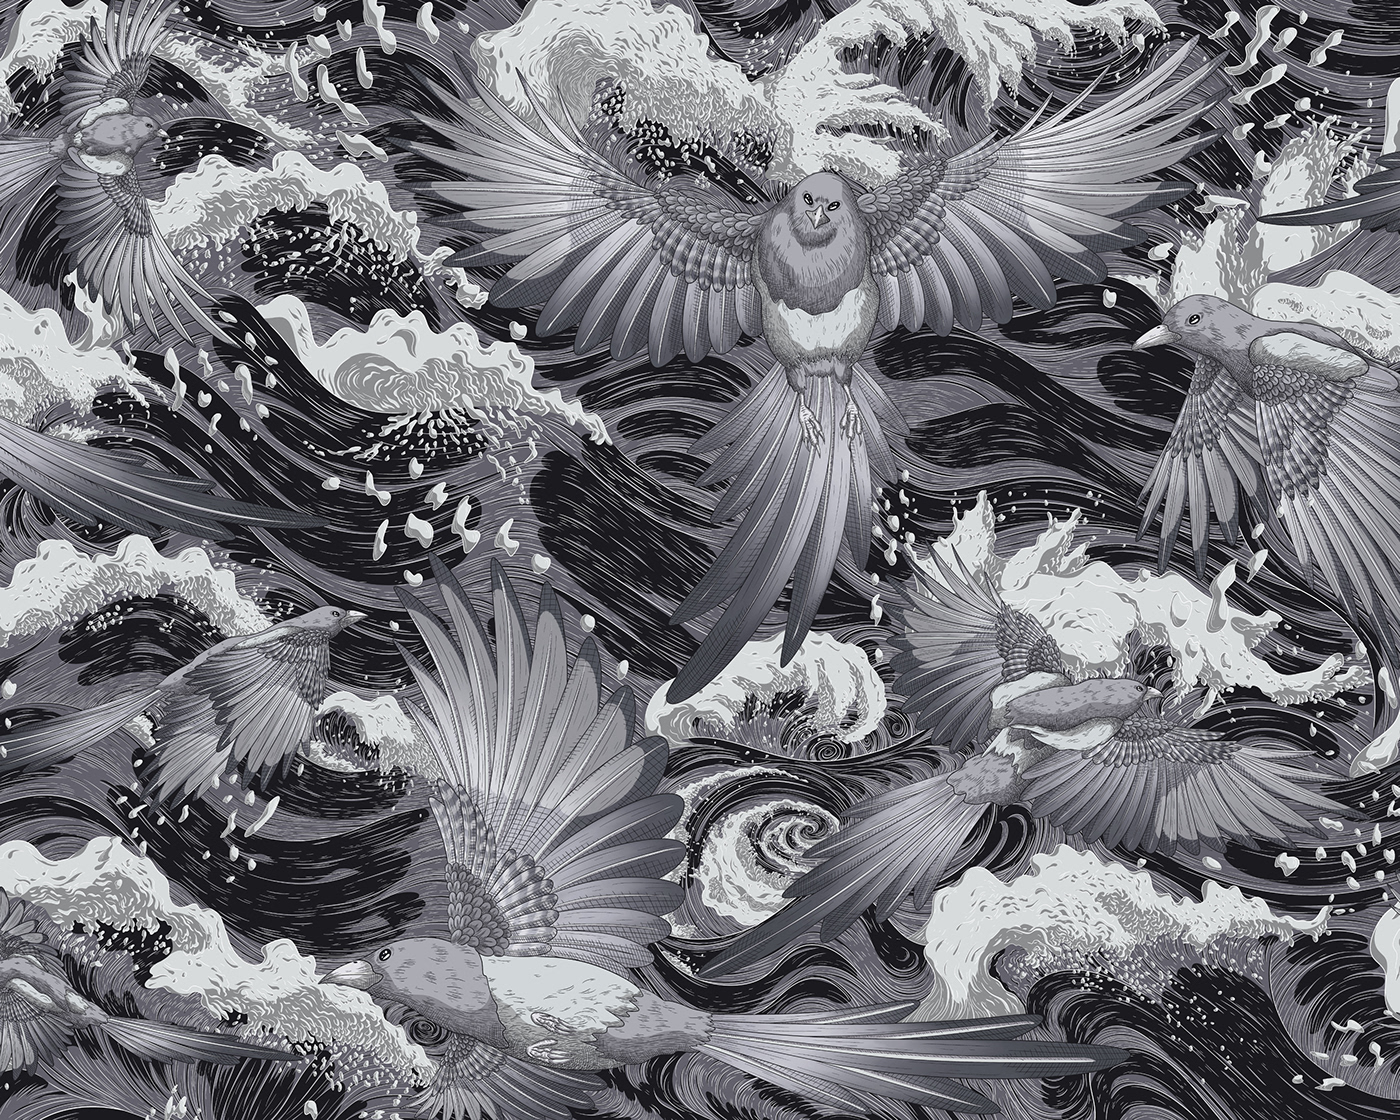 A monochromatic black and white illustration of a flock of magpies above the sea.